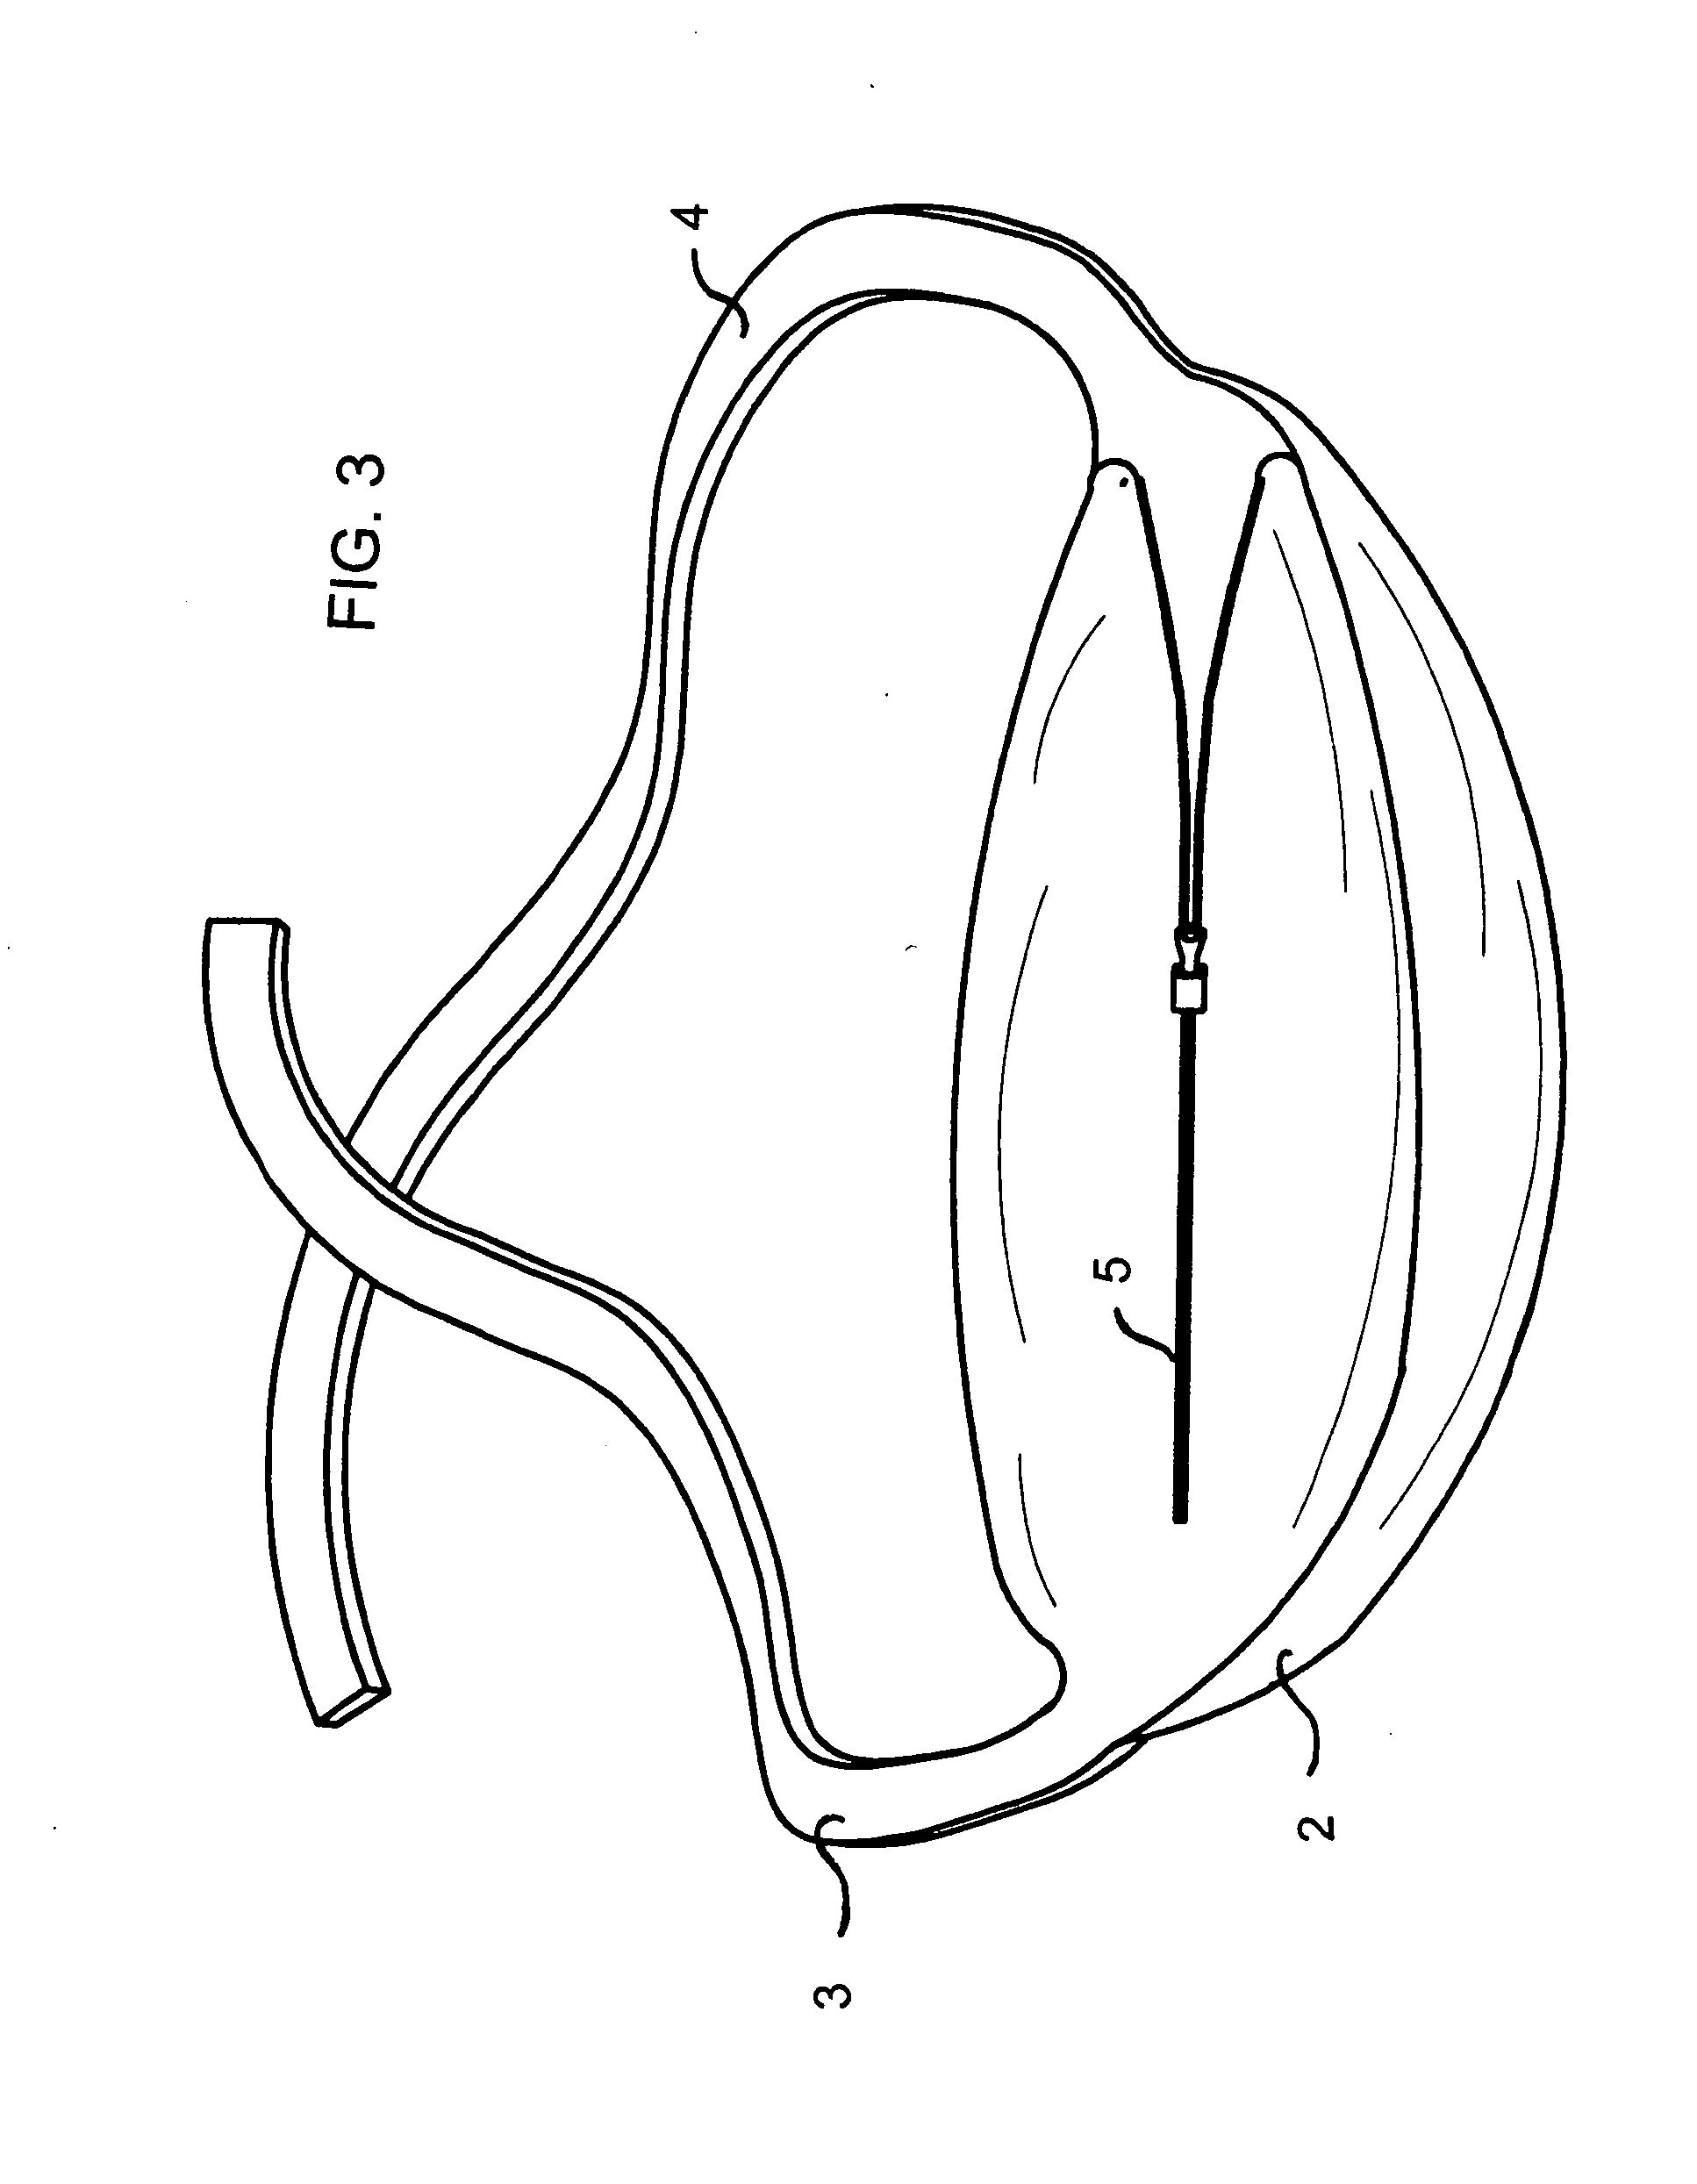 Nursing purse and method for converting a purse to a nursing pillow